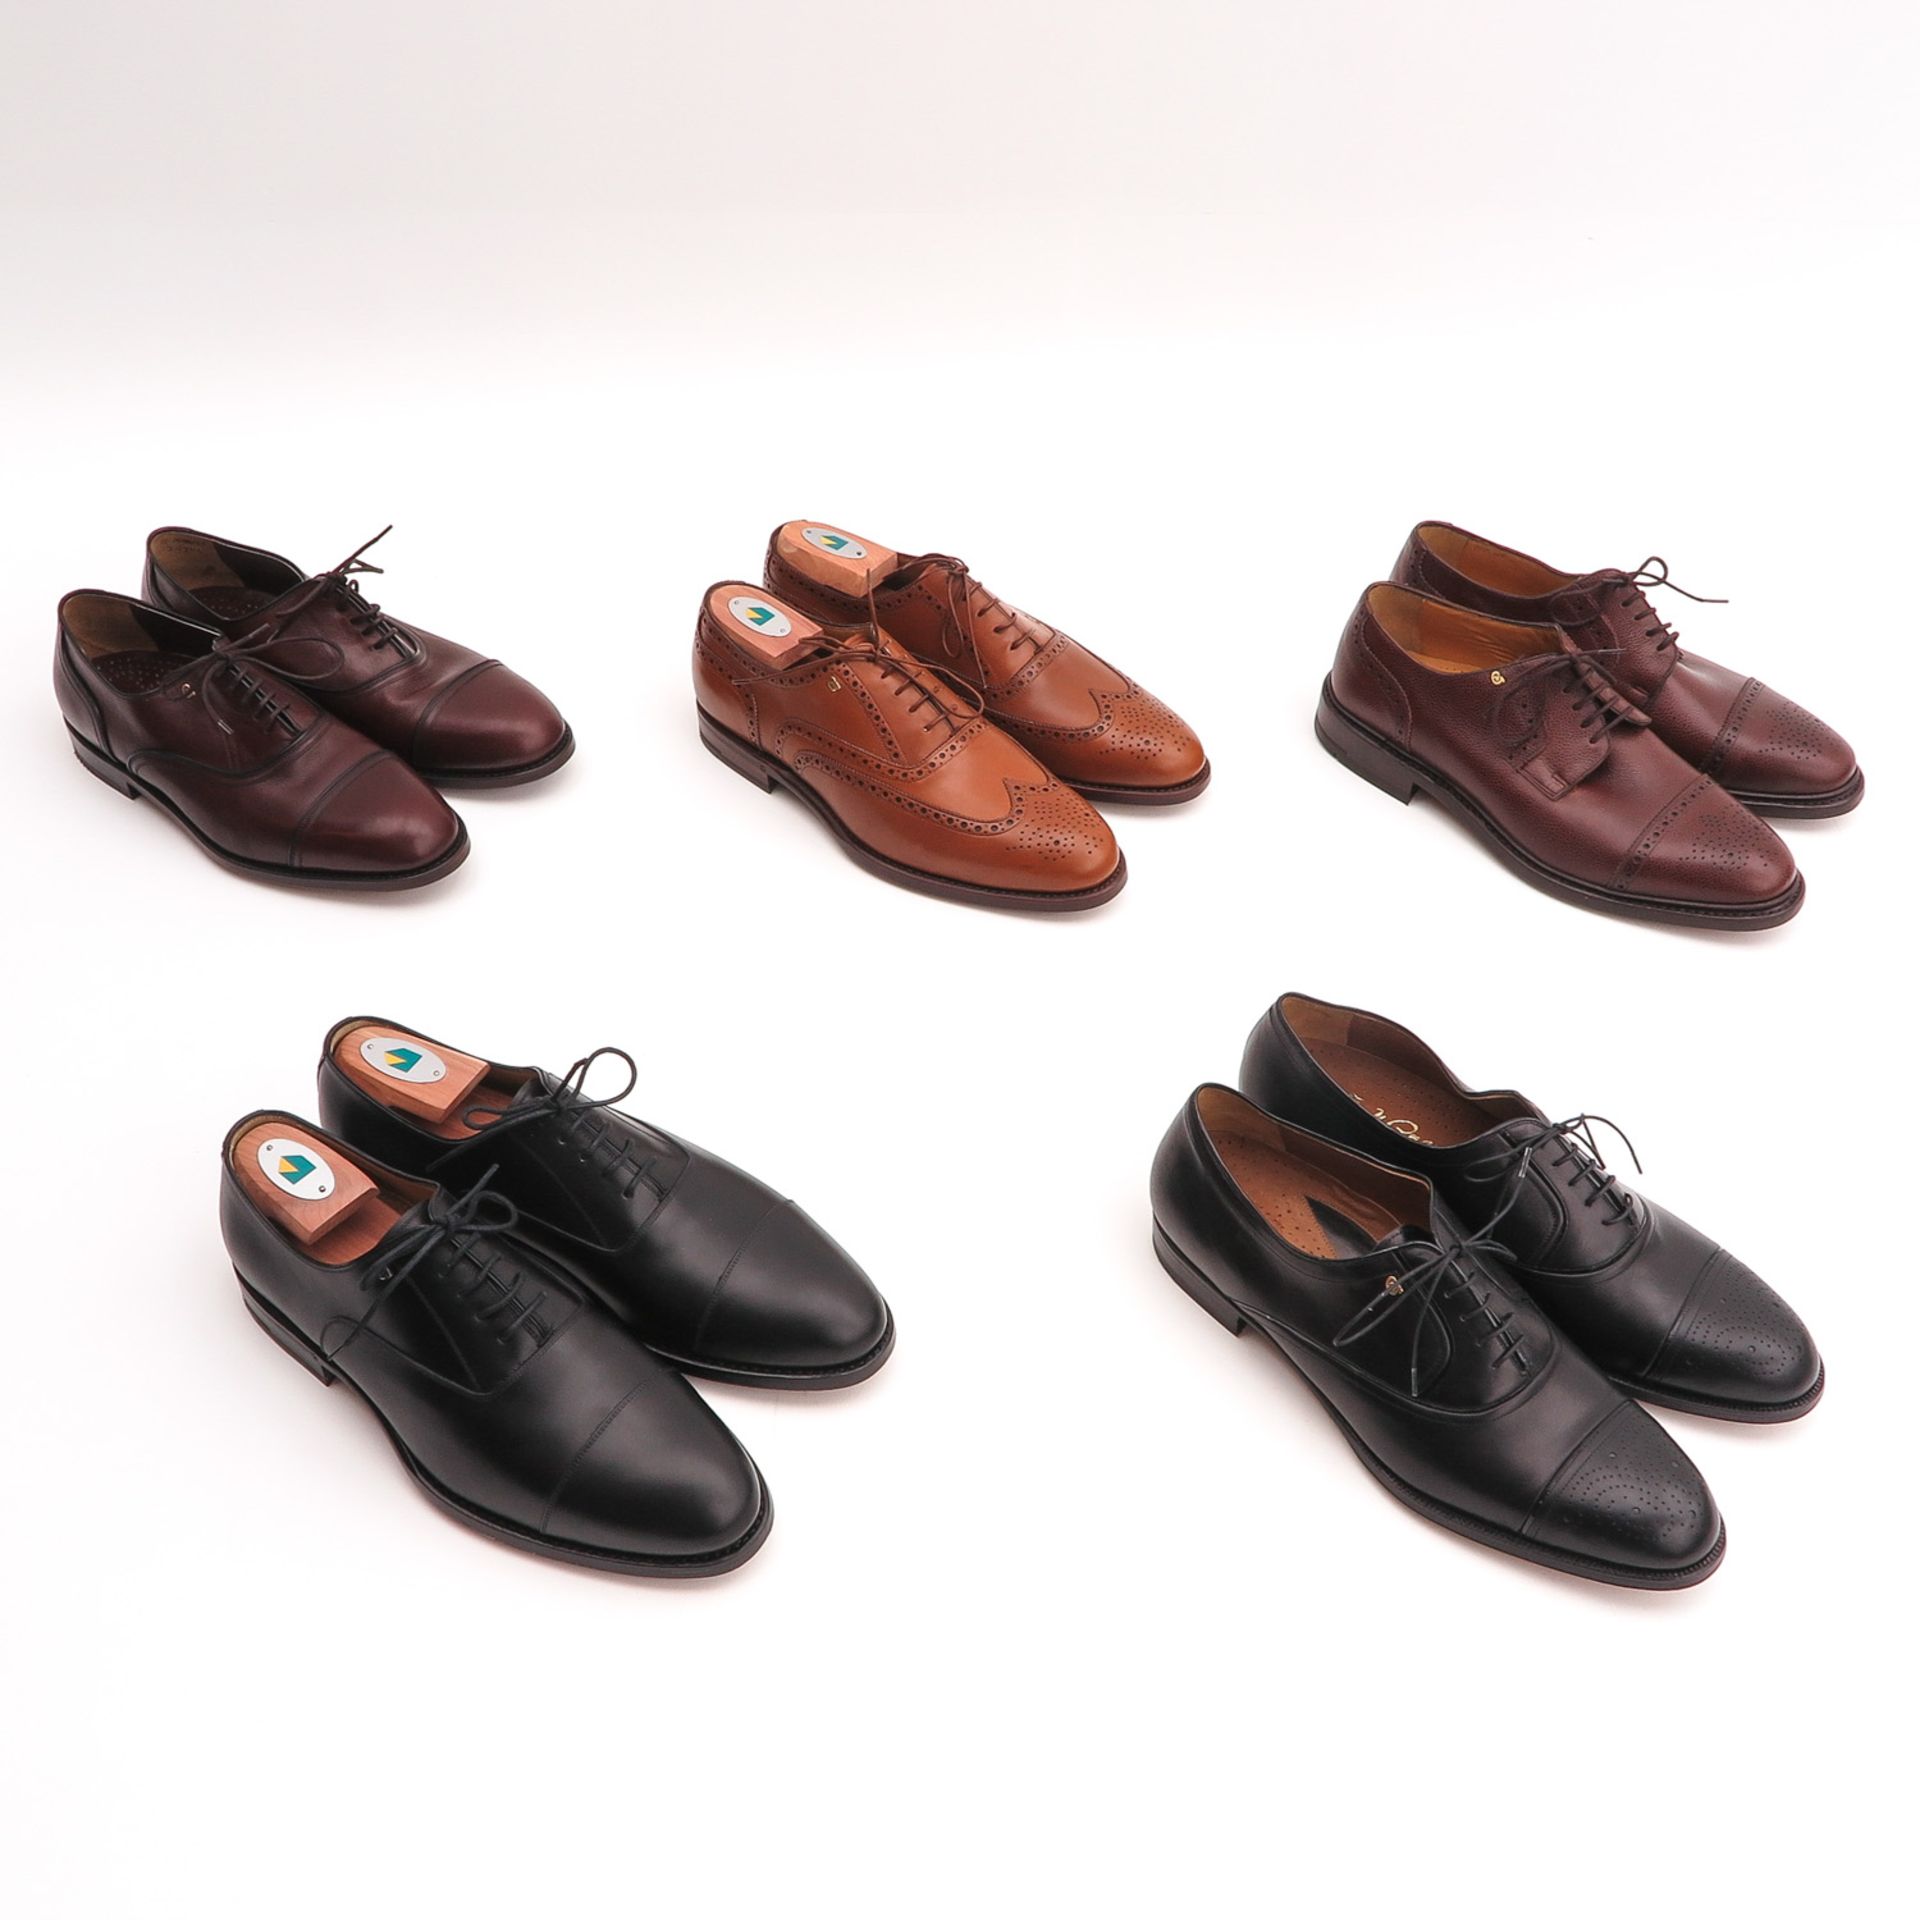 A Collection of Mens Shoes